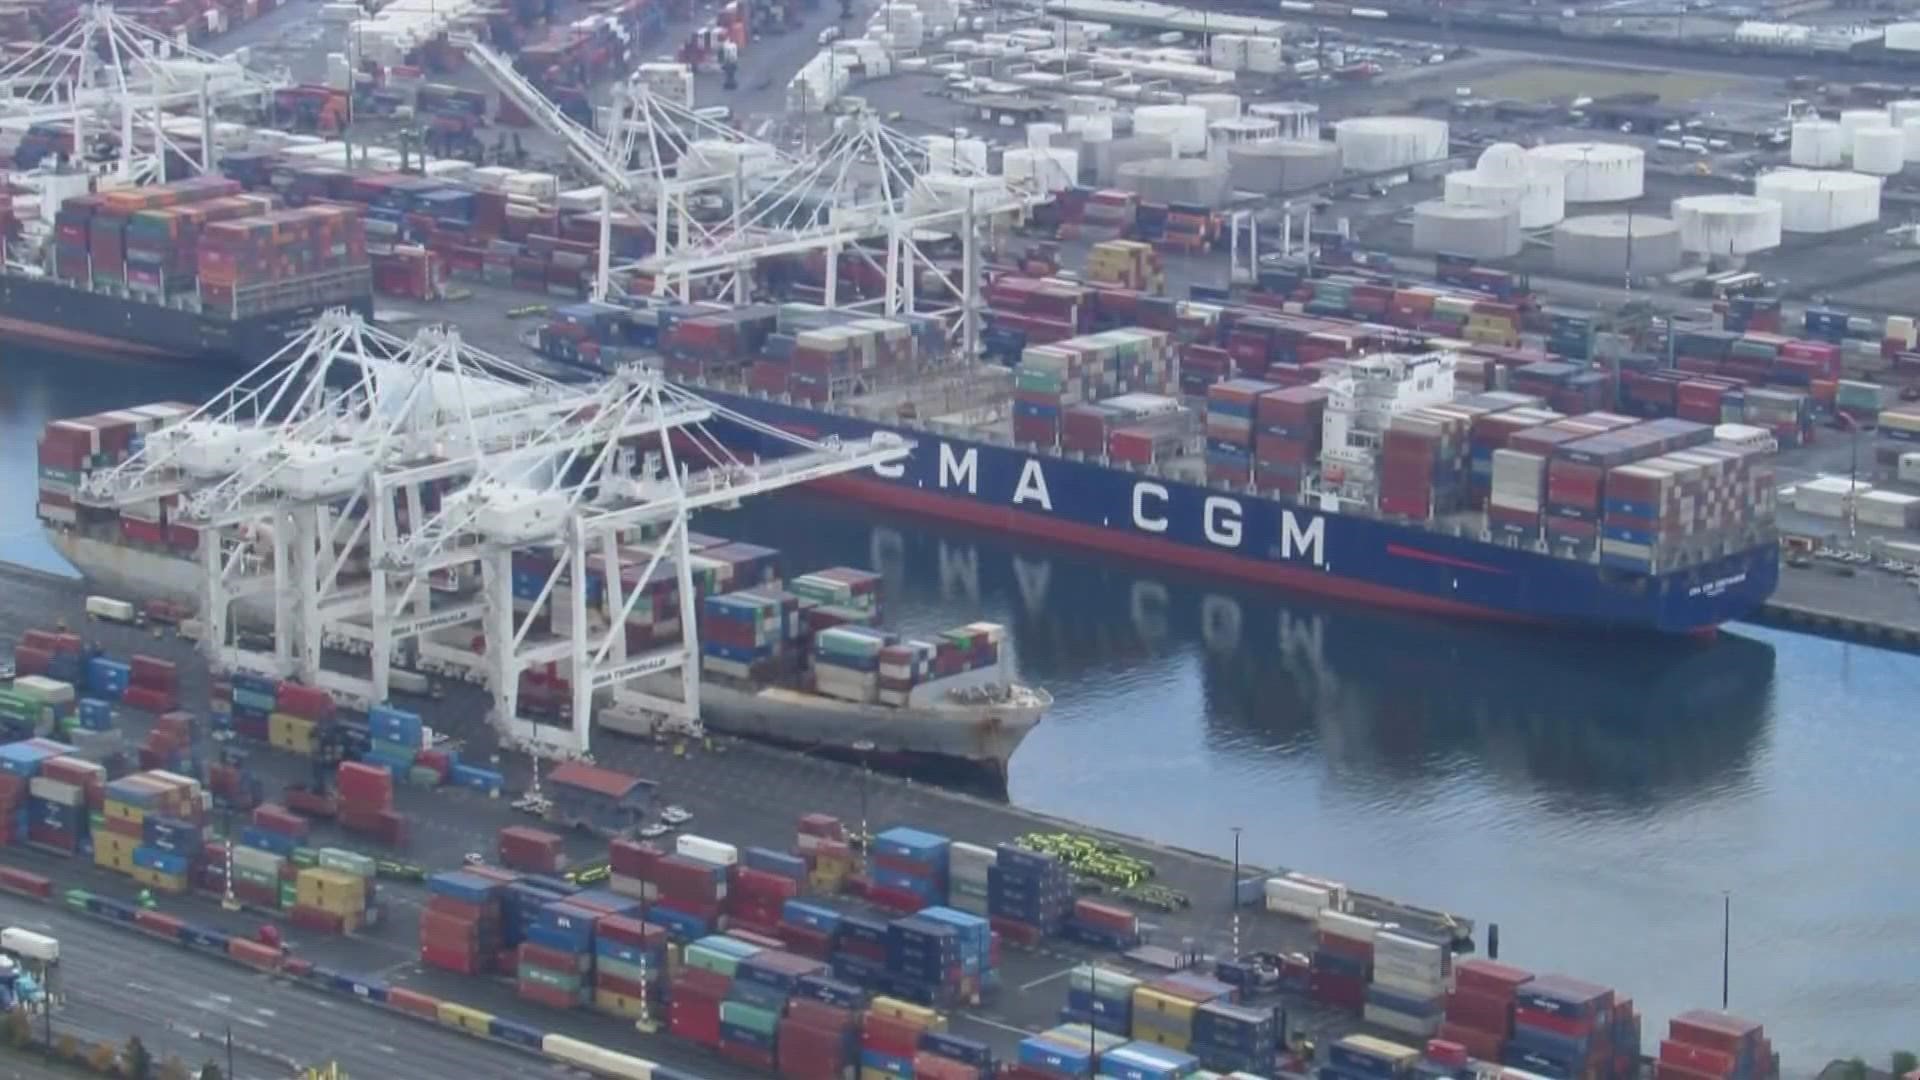 The Northwest Seaport Alliance, which handles cargo operations for the Ports of Seattle and Tacoma, said it's "all hands on deck" to get goods moving.